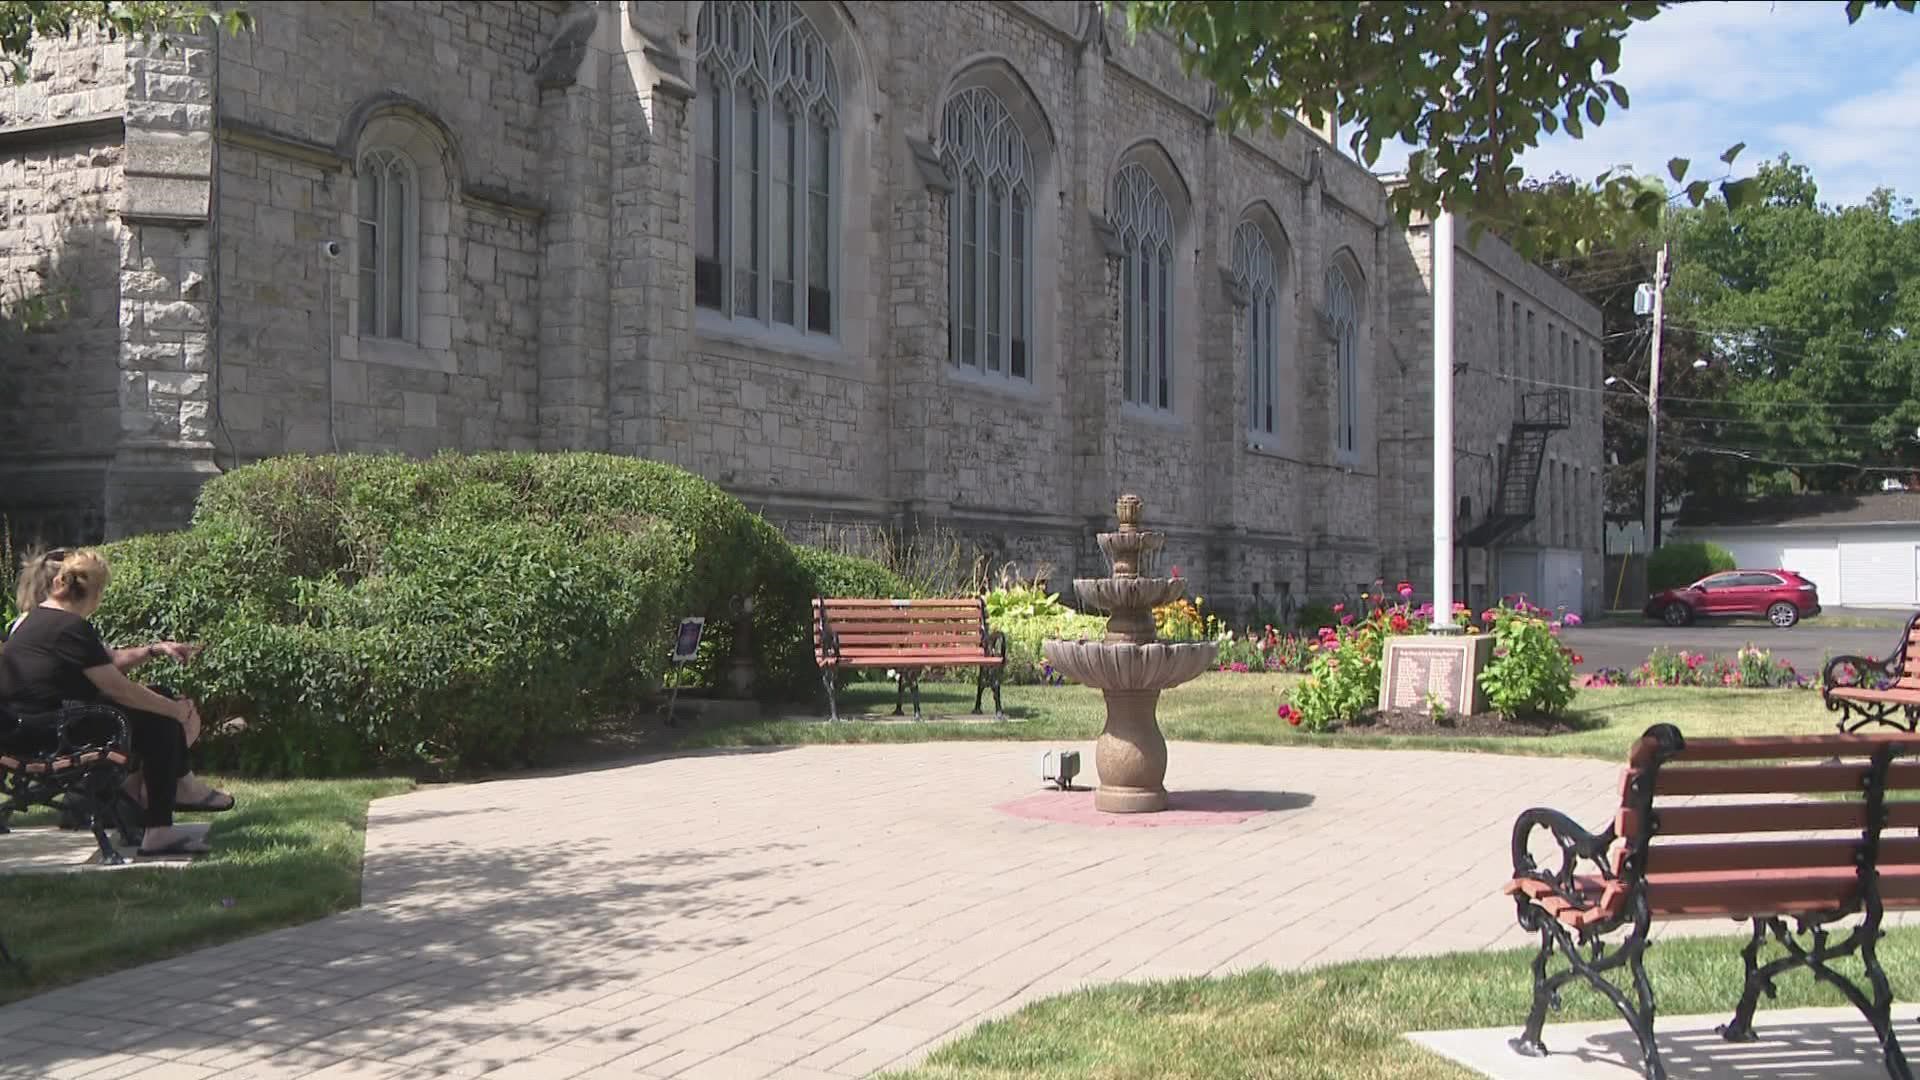 The names of each person killed in that shooting, etched into stone bricks. They are in the memorial courtyard at Holy Trinity on Main Street in Buffalo.